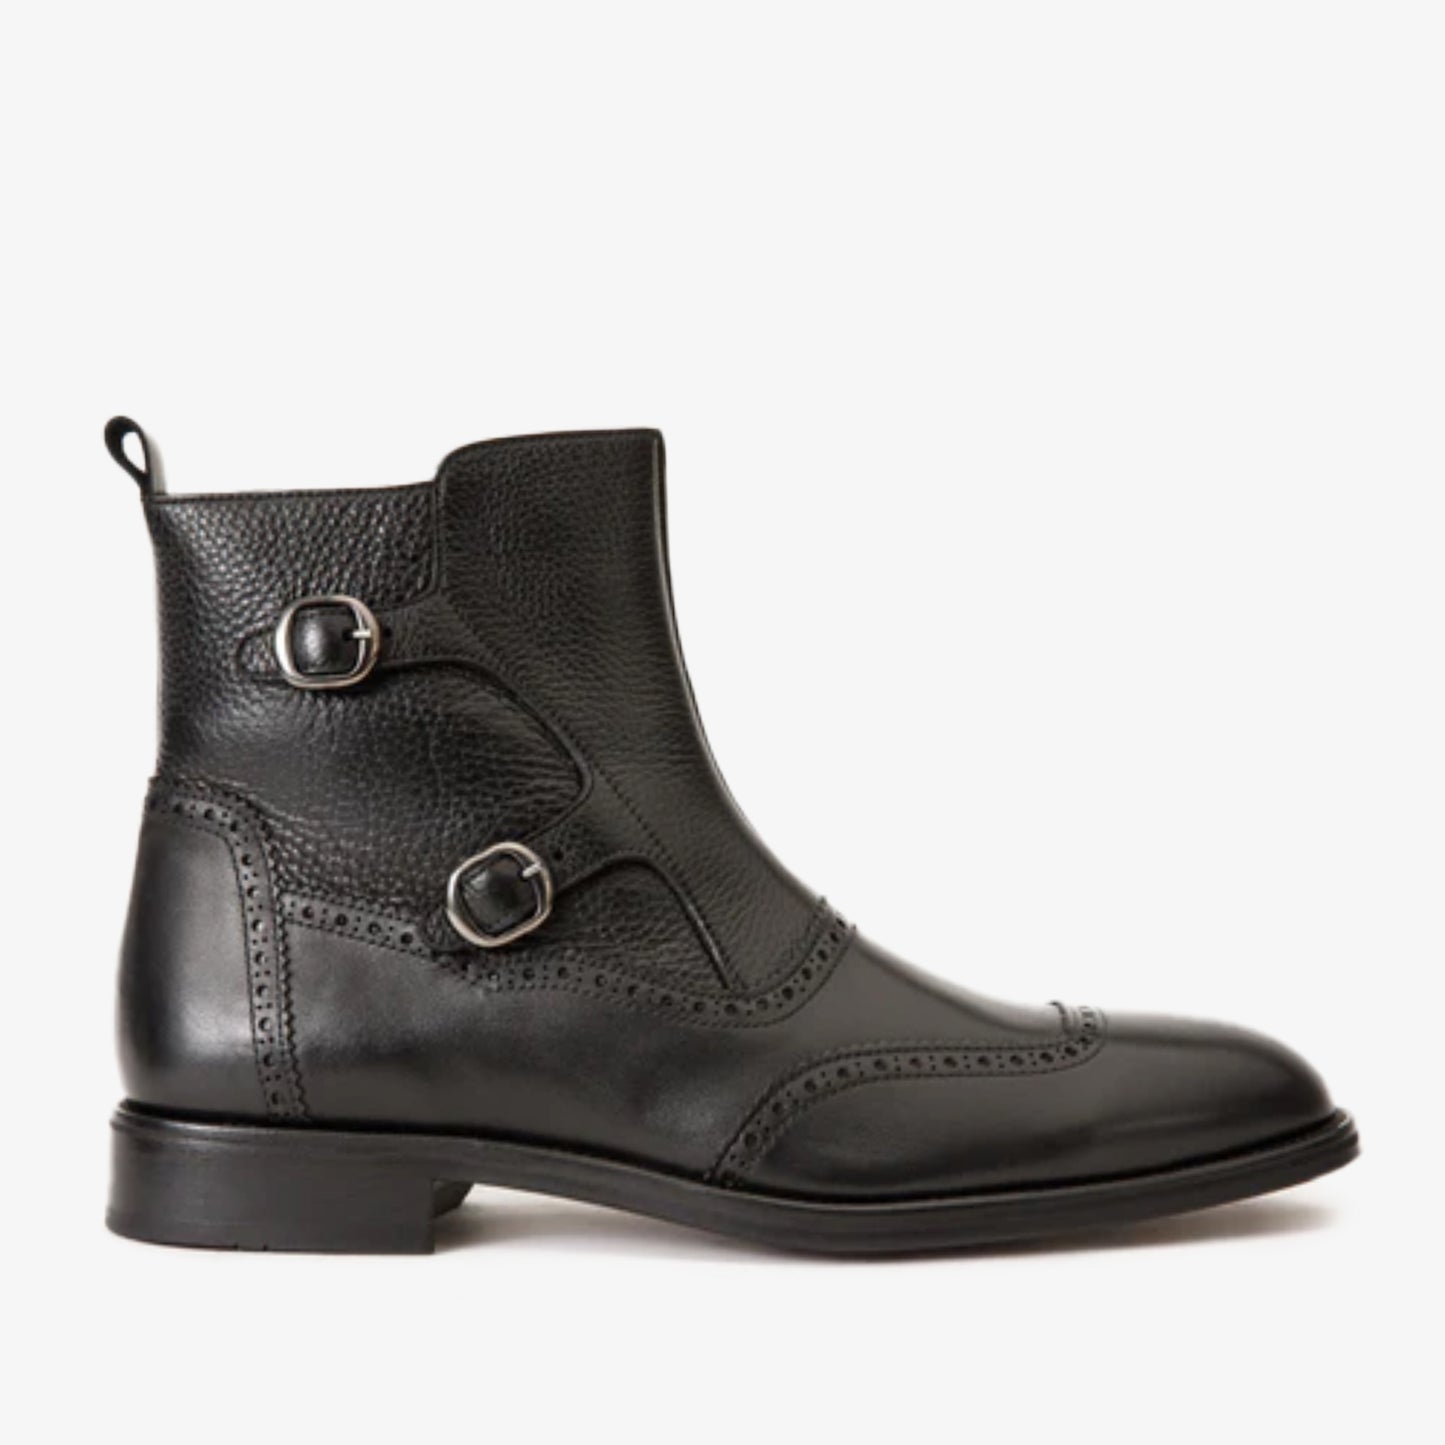 The Rand Black Leather Double Buckle Brogue Men Boot with a Zipper